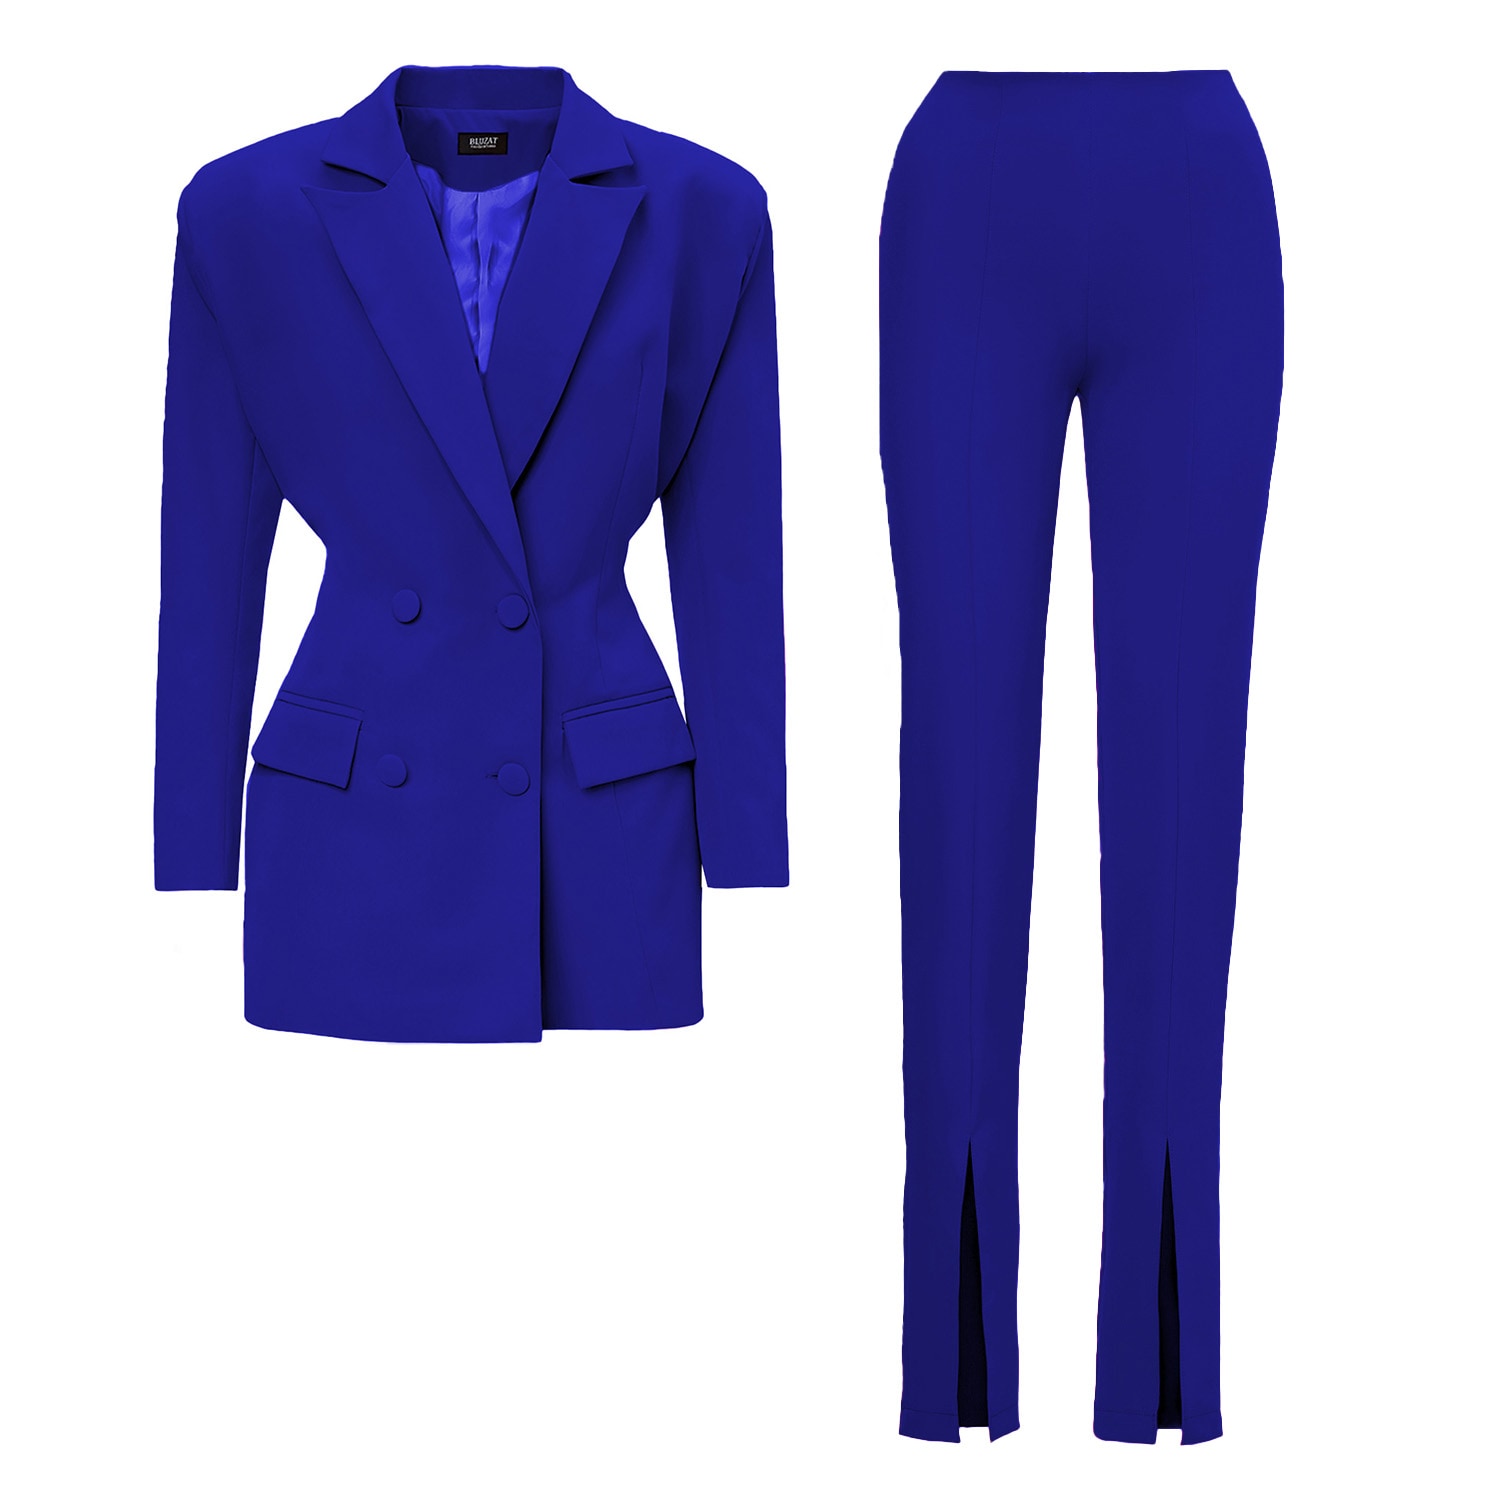 Women’s Electric Blue Suit With Tailored Hourglass Blazer And Slim Fit Trousers Large Bluzat